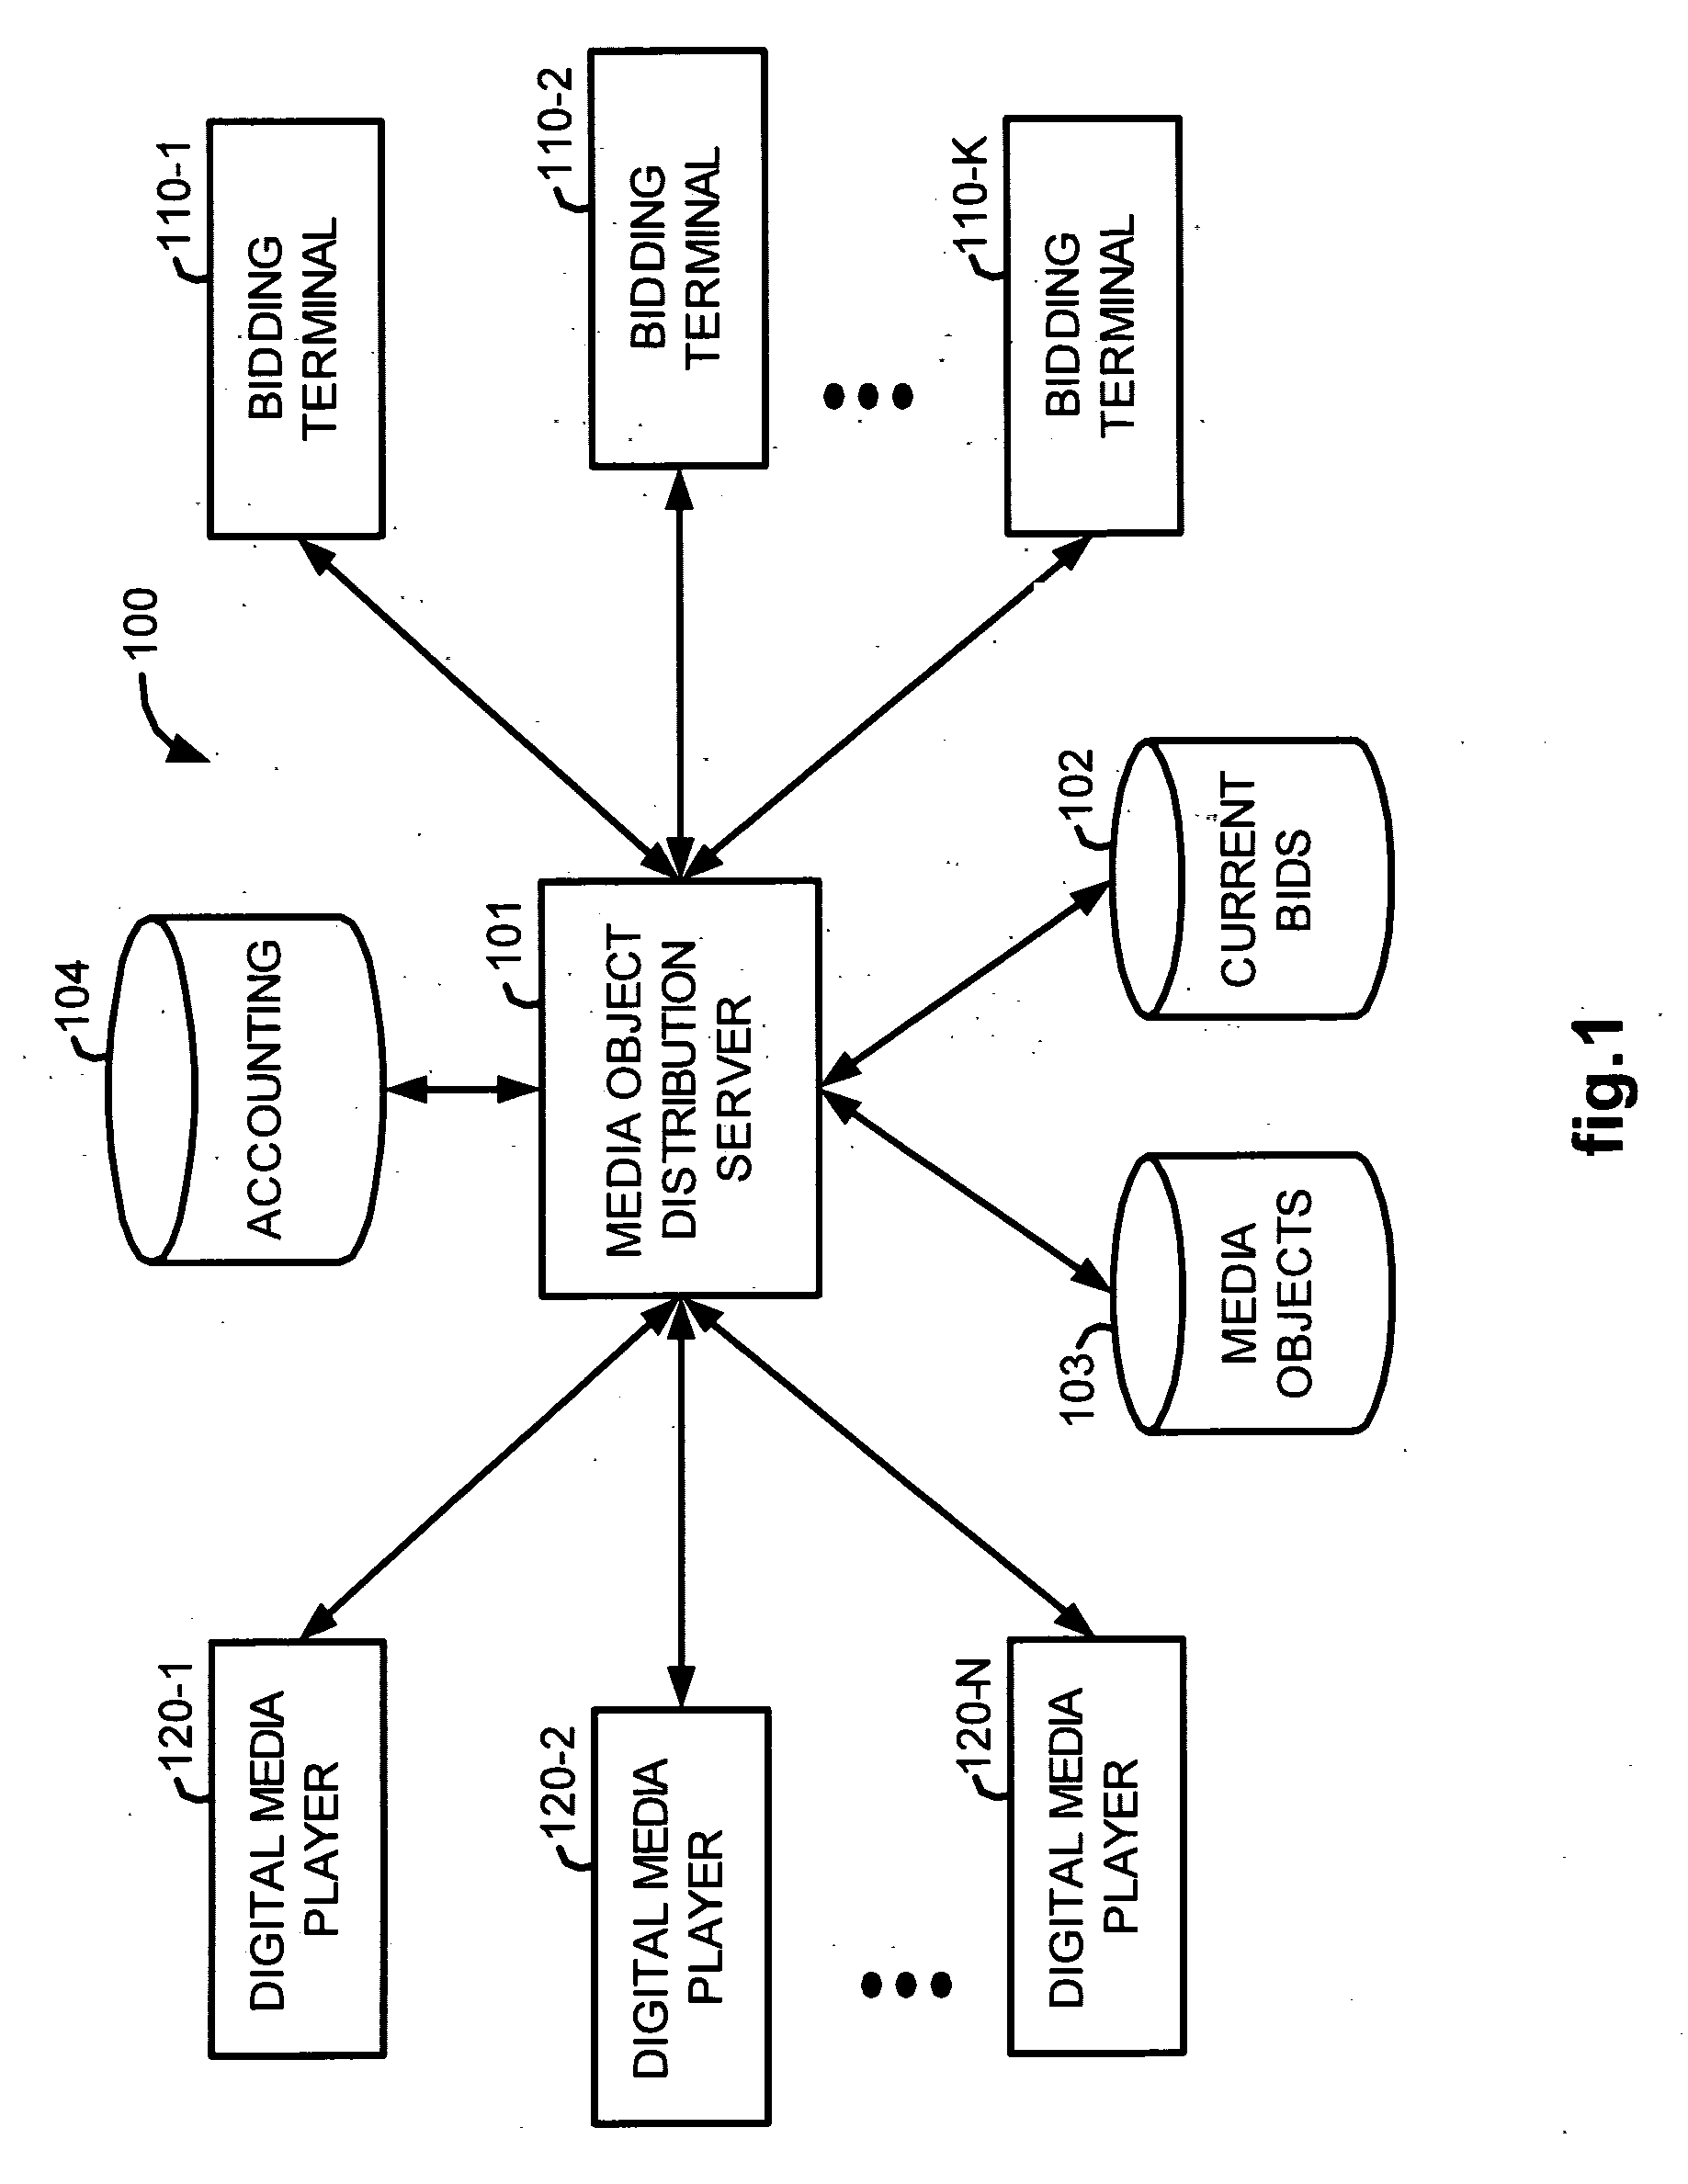 Bid-based delivery of advertising promotions on internet-connected media players